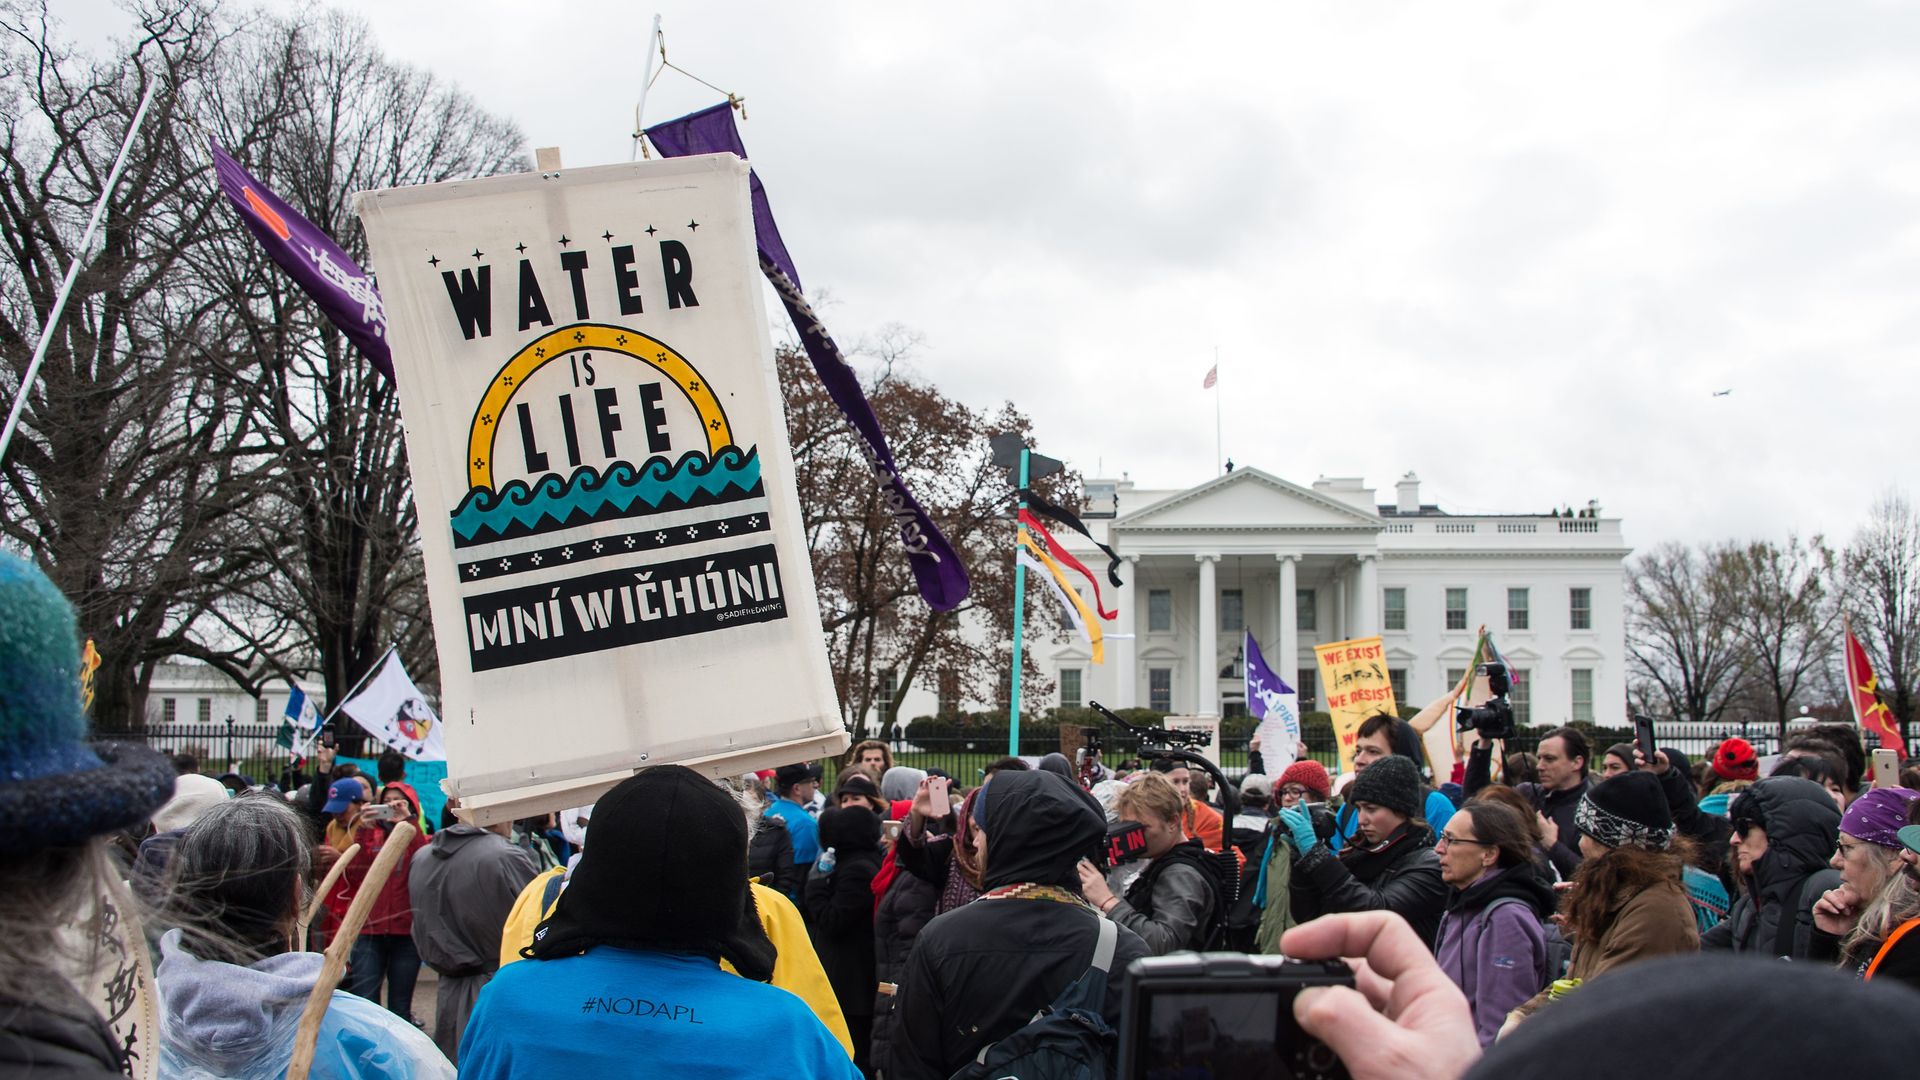 In this image, protestors hold a banner that reads "water is life" in front of the White House.